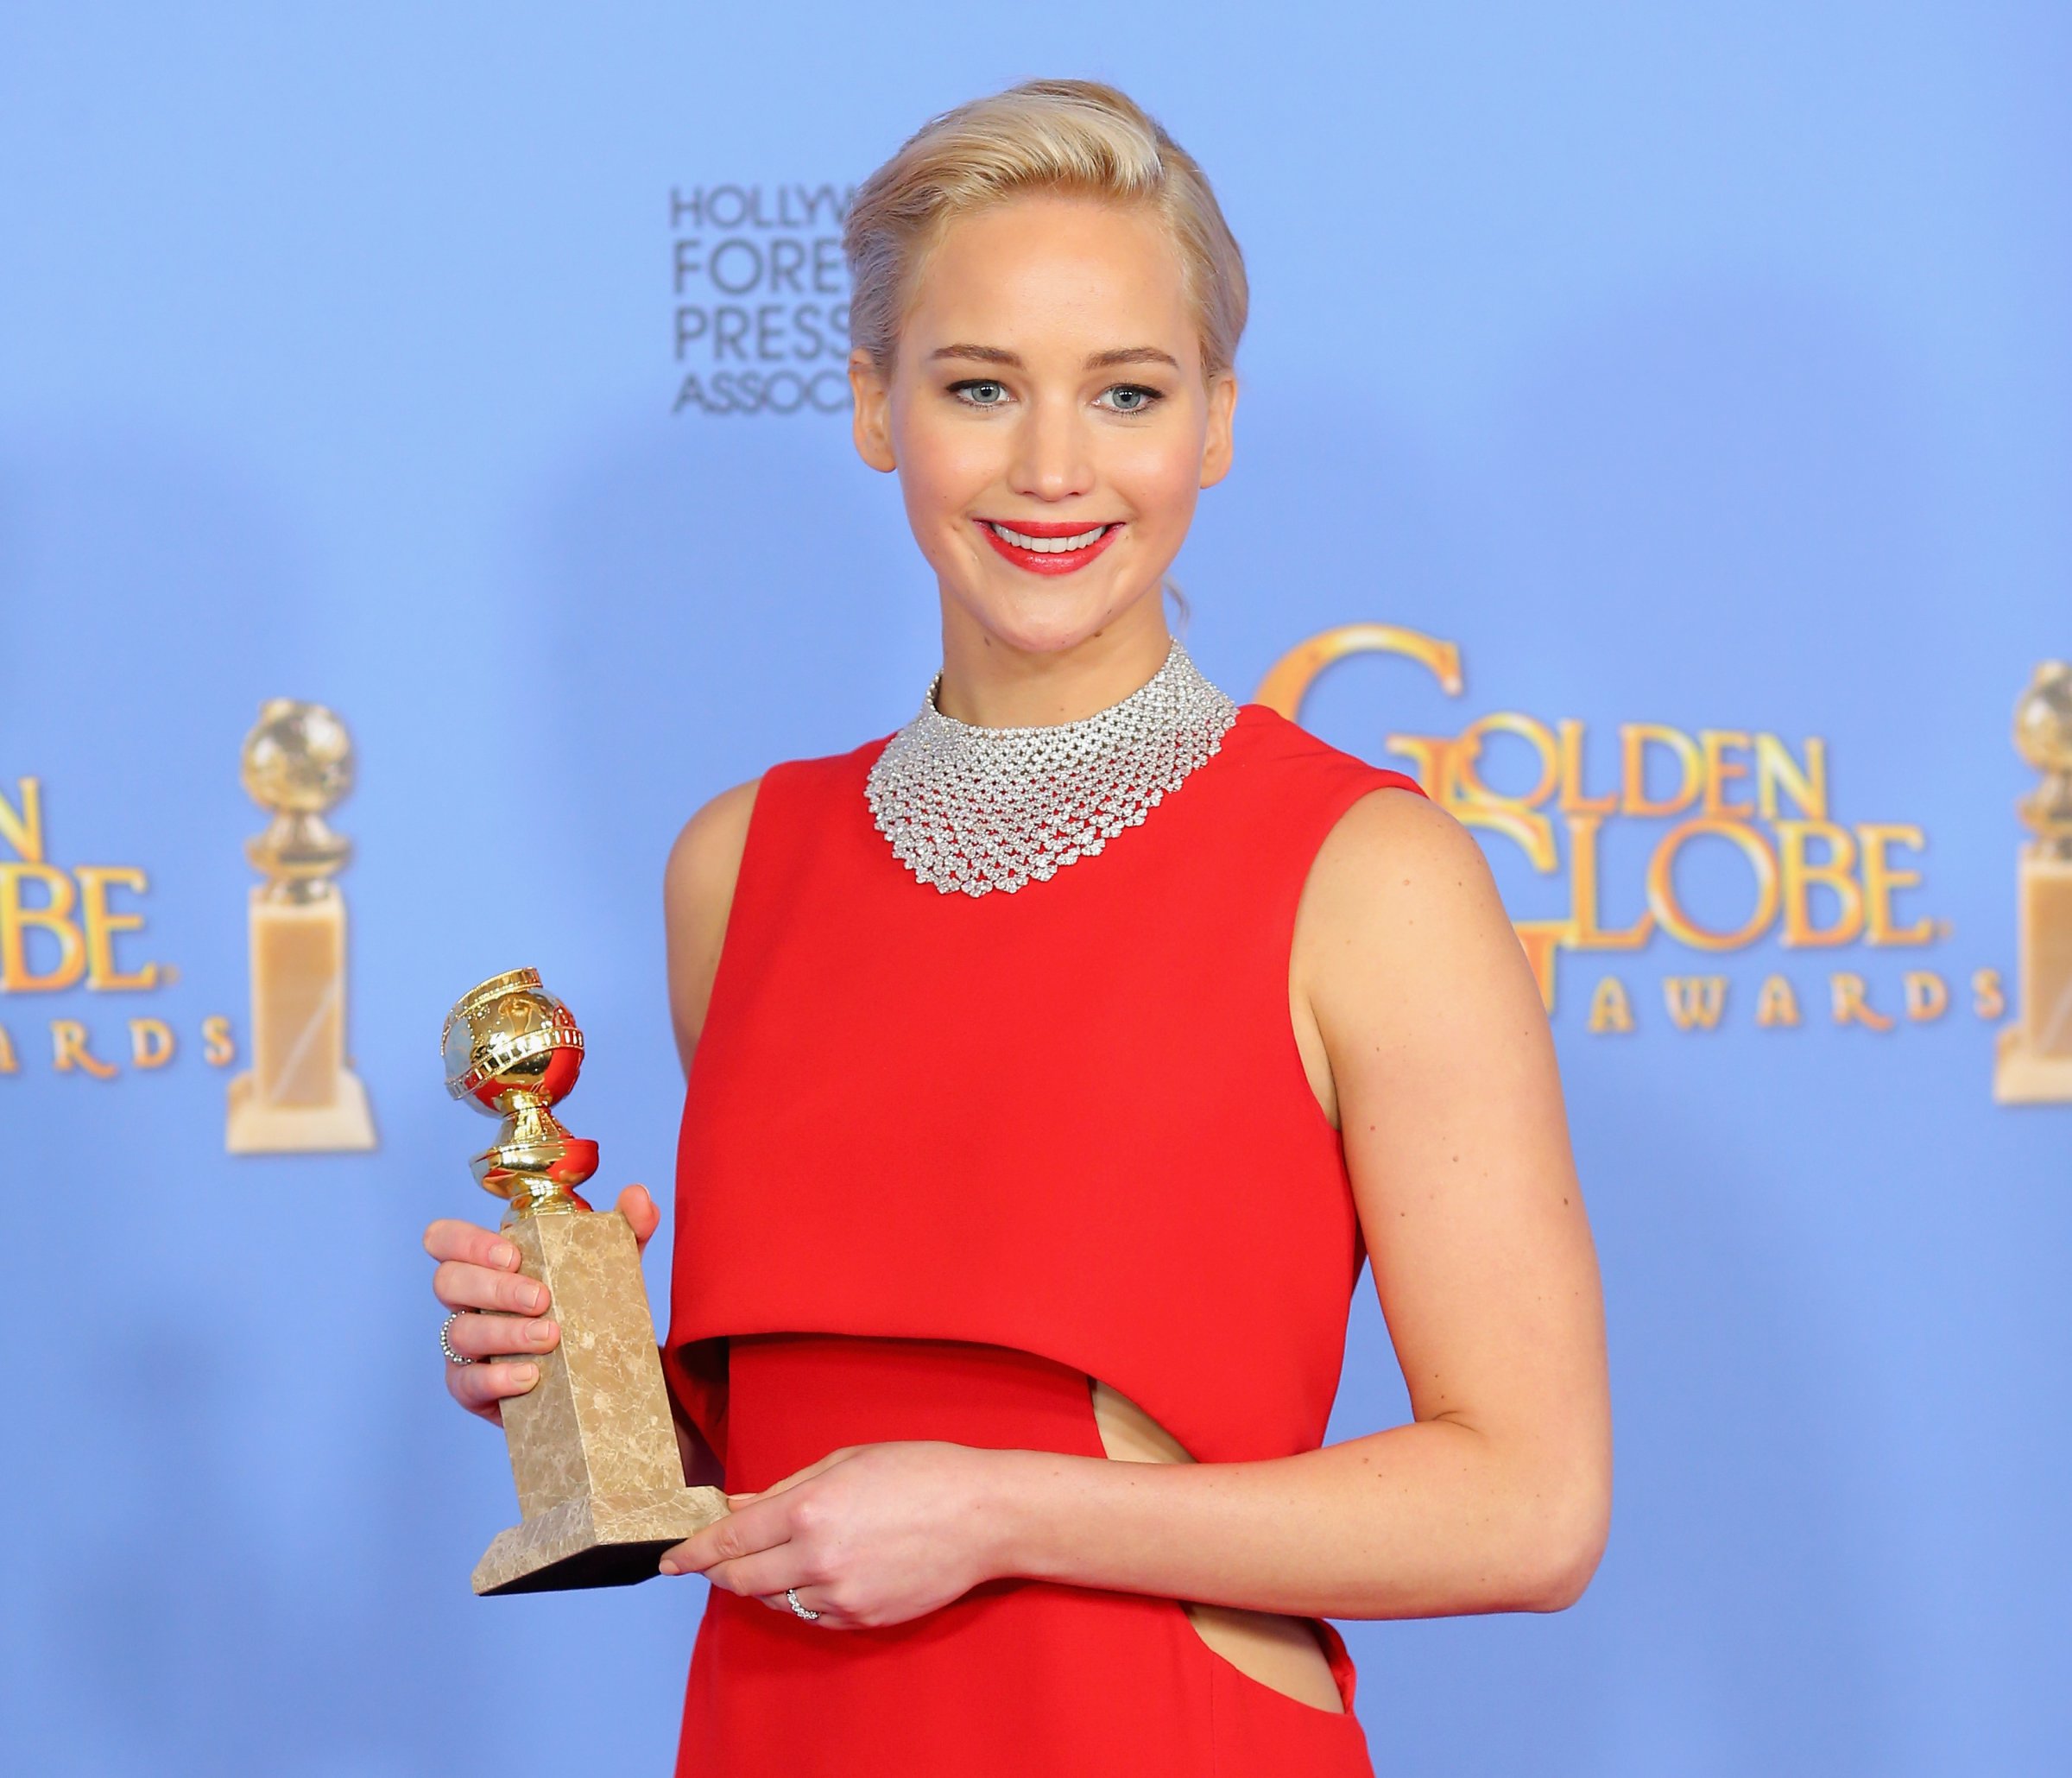 Actress Jennifer Lawrence, poses in the press room during the 73rd Annual Golden Globe Awards held at the Beverly Hilton Hotel on January 10, 2016 in Beverly Hills, California.